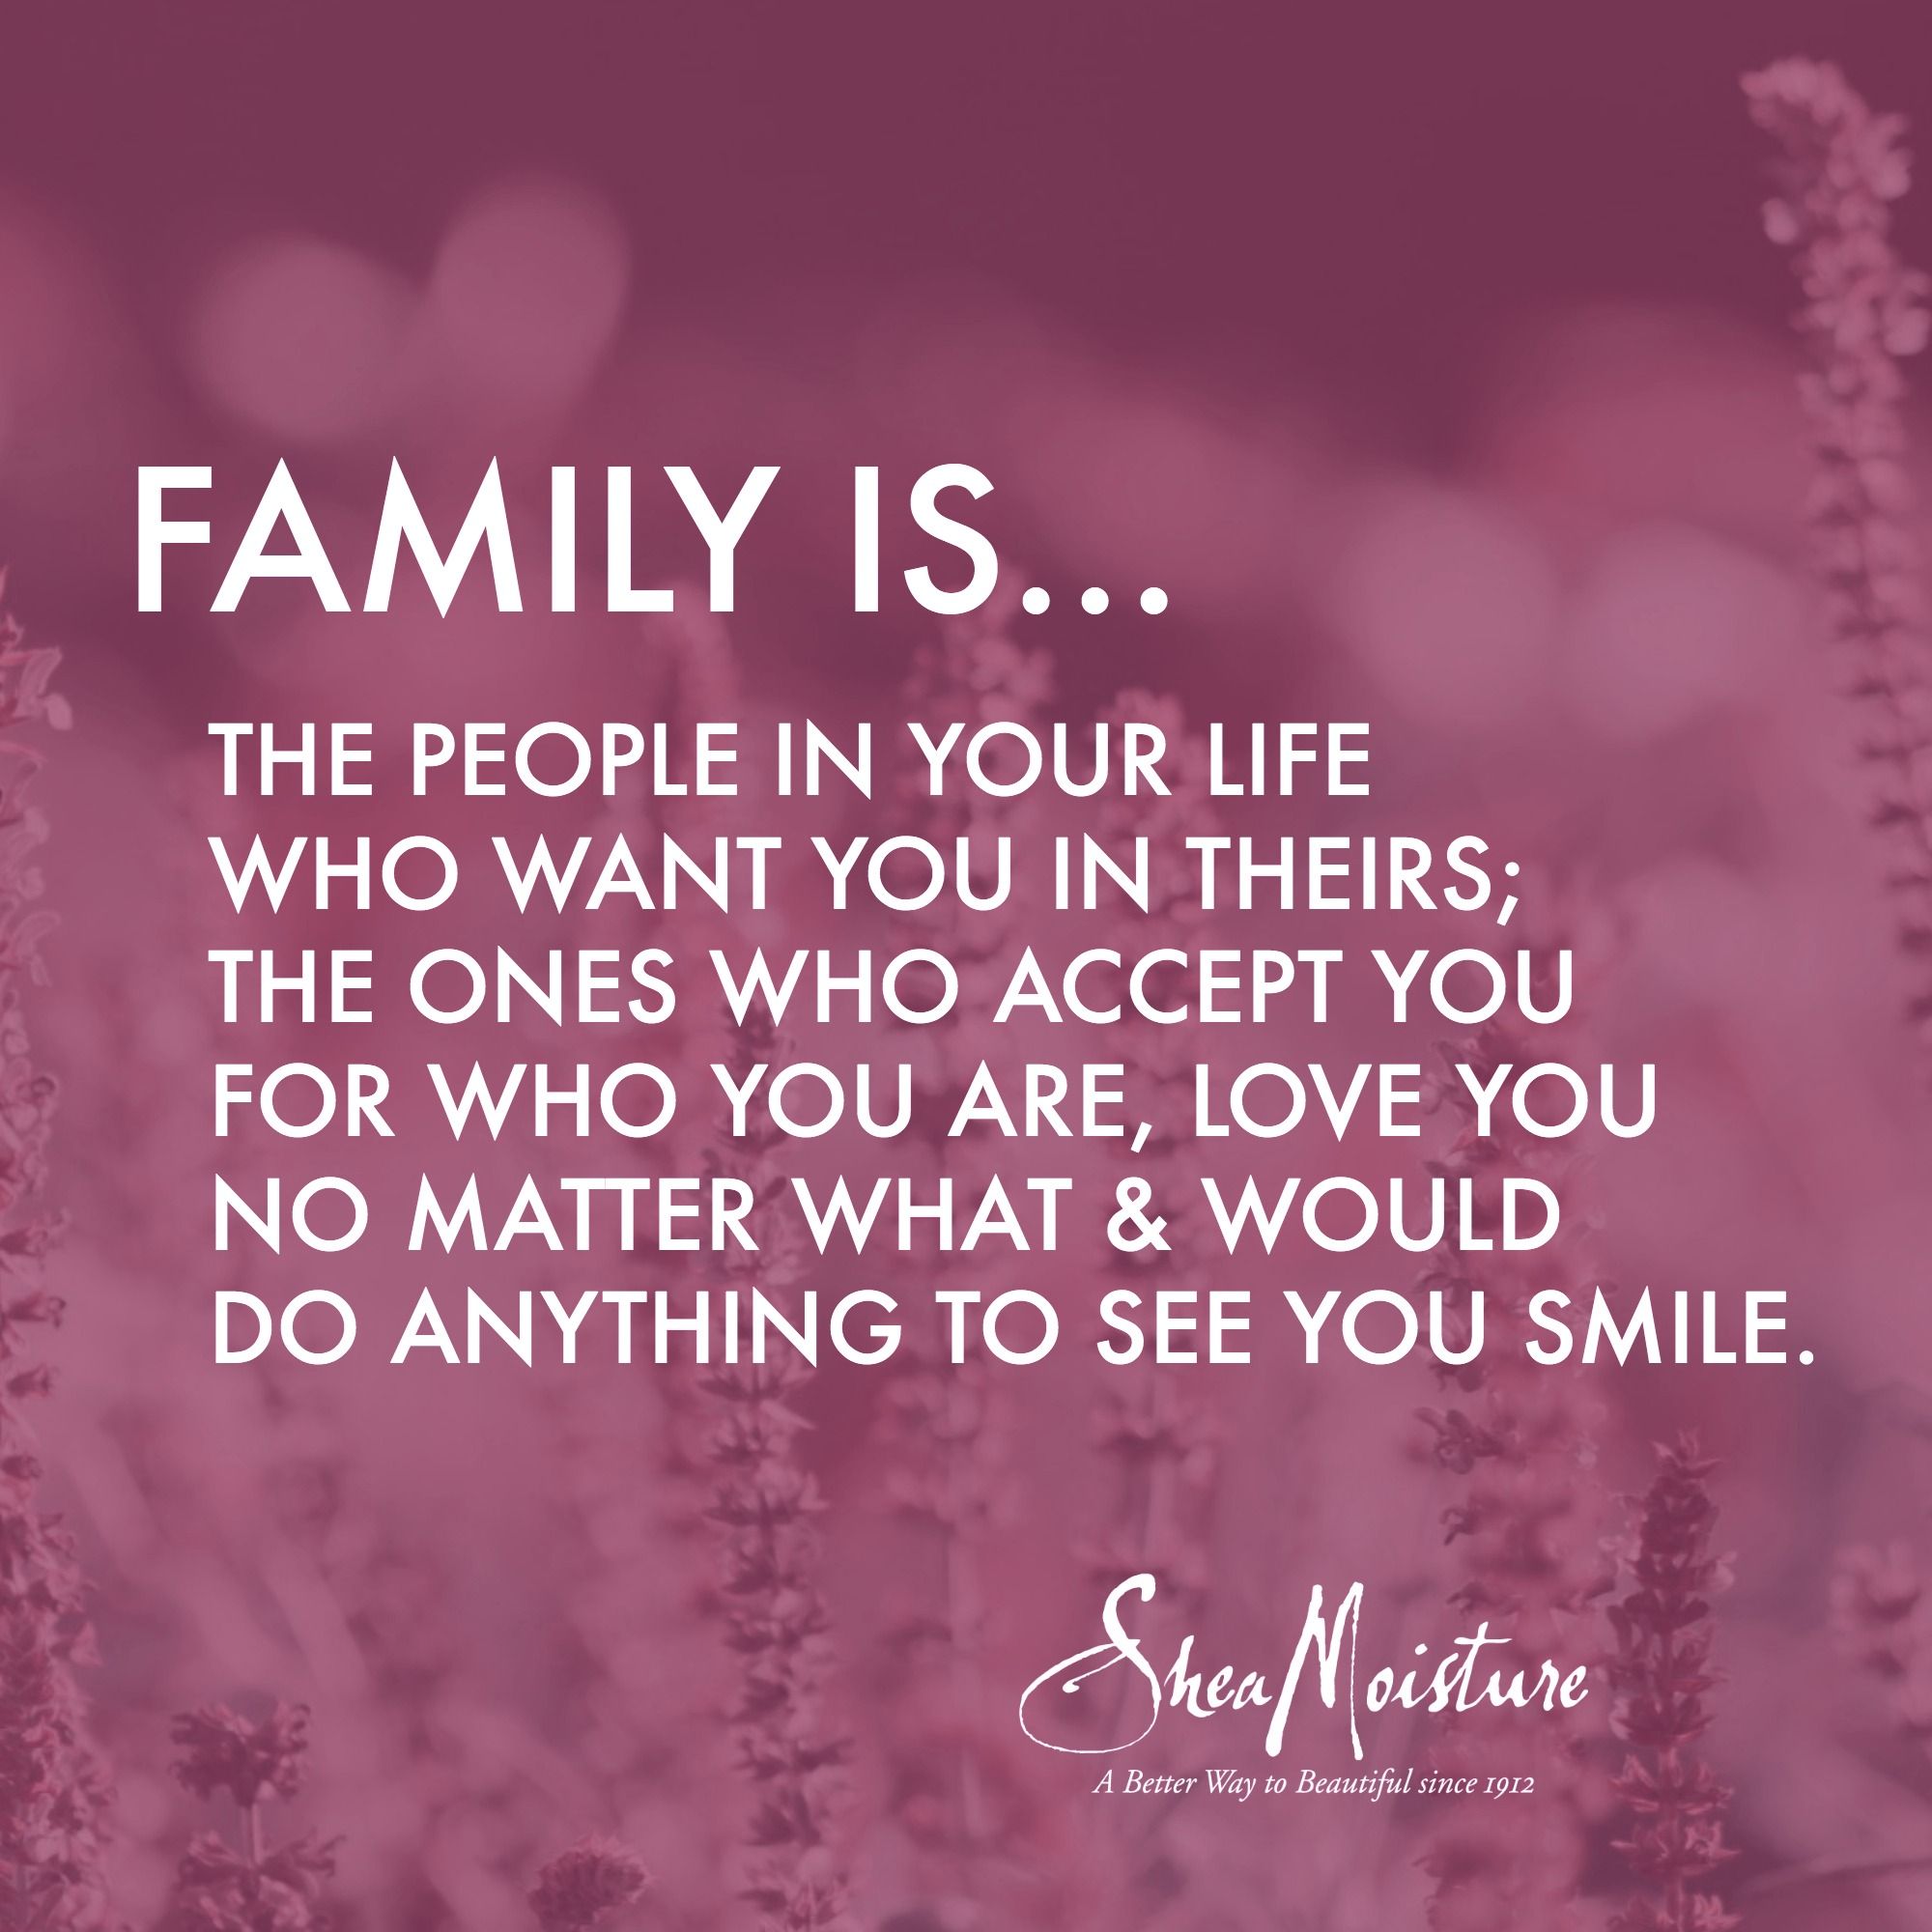 Meaning of family quotes